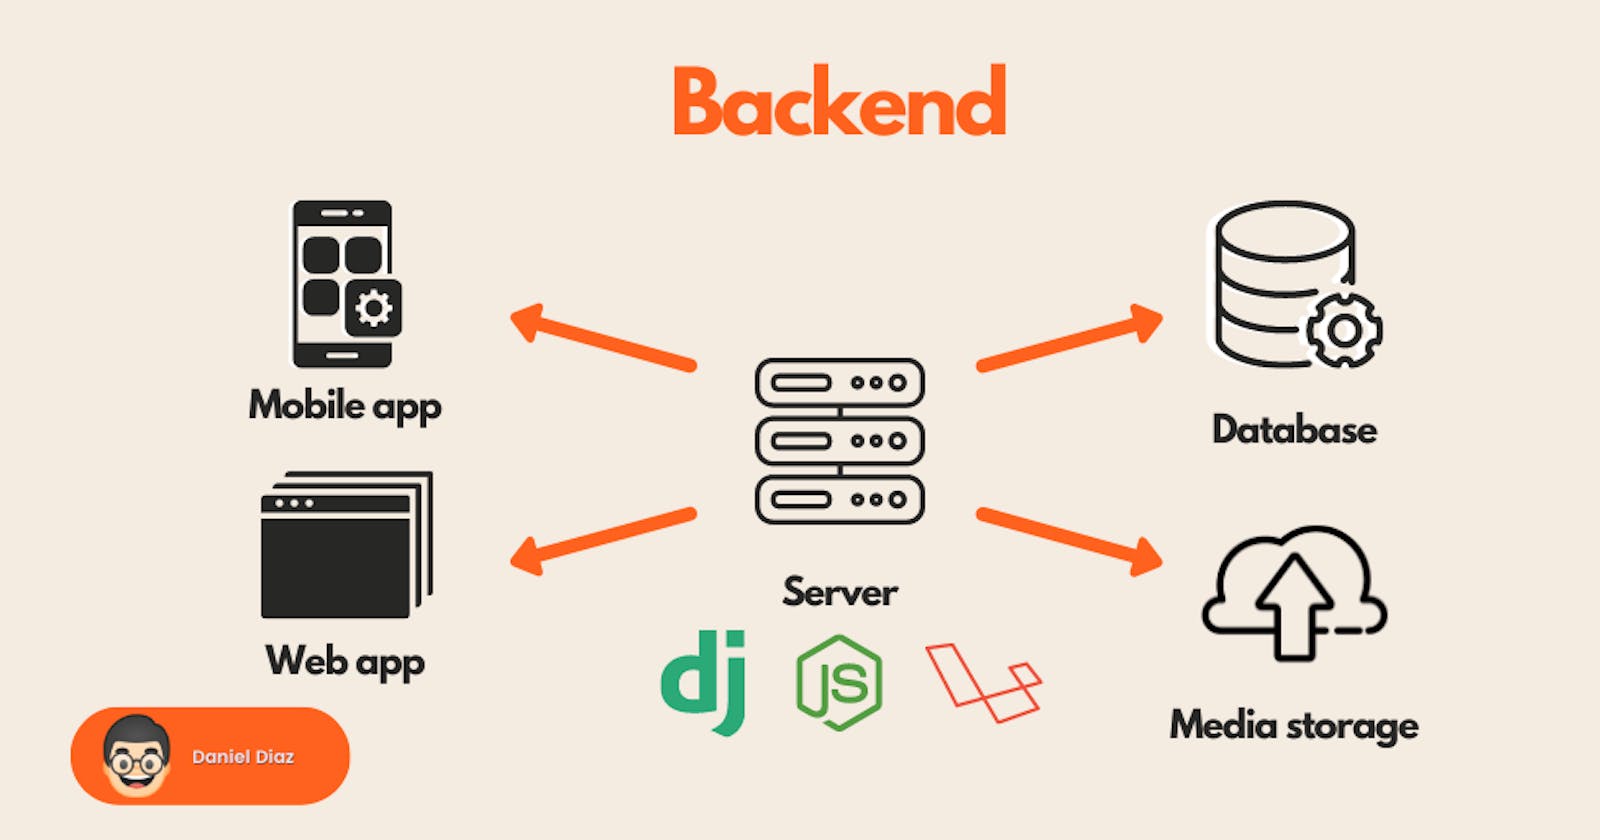 Starting from Scratch: A Guide to Enter the Backend Development Field